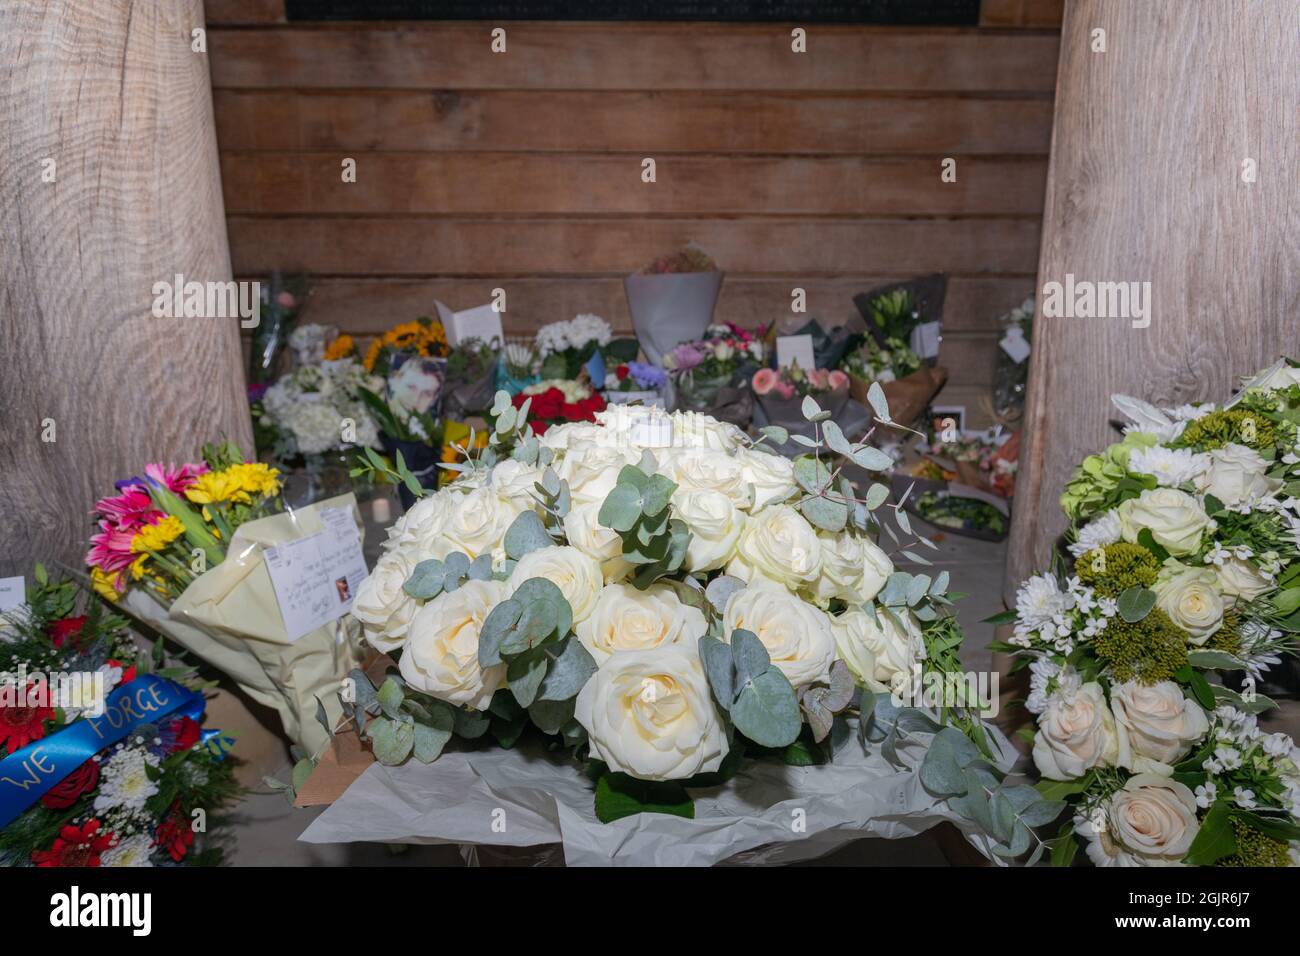 11th Sept, 2021. London, UK. Flowers left at the memorial garden in Grosvenor Square in remembrance on the 20th anniversary of the September 11th terrorist attacks in the United States. The garden remembers all victims of the attack, including the 67 UK citizens who lost their lives. Penelope Barritt/Alamy live news Stock Photo